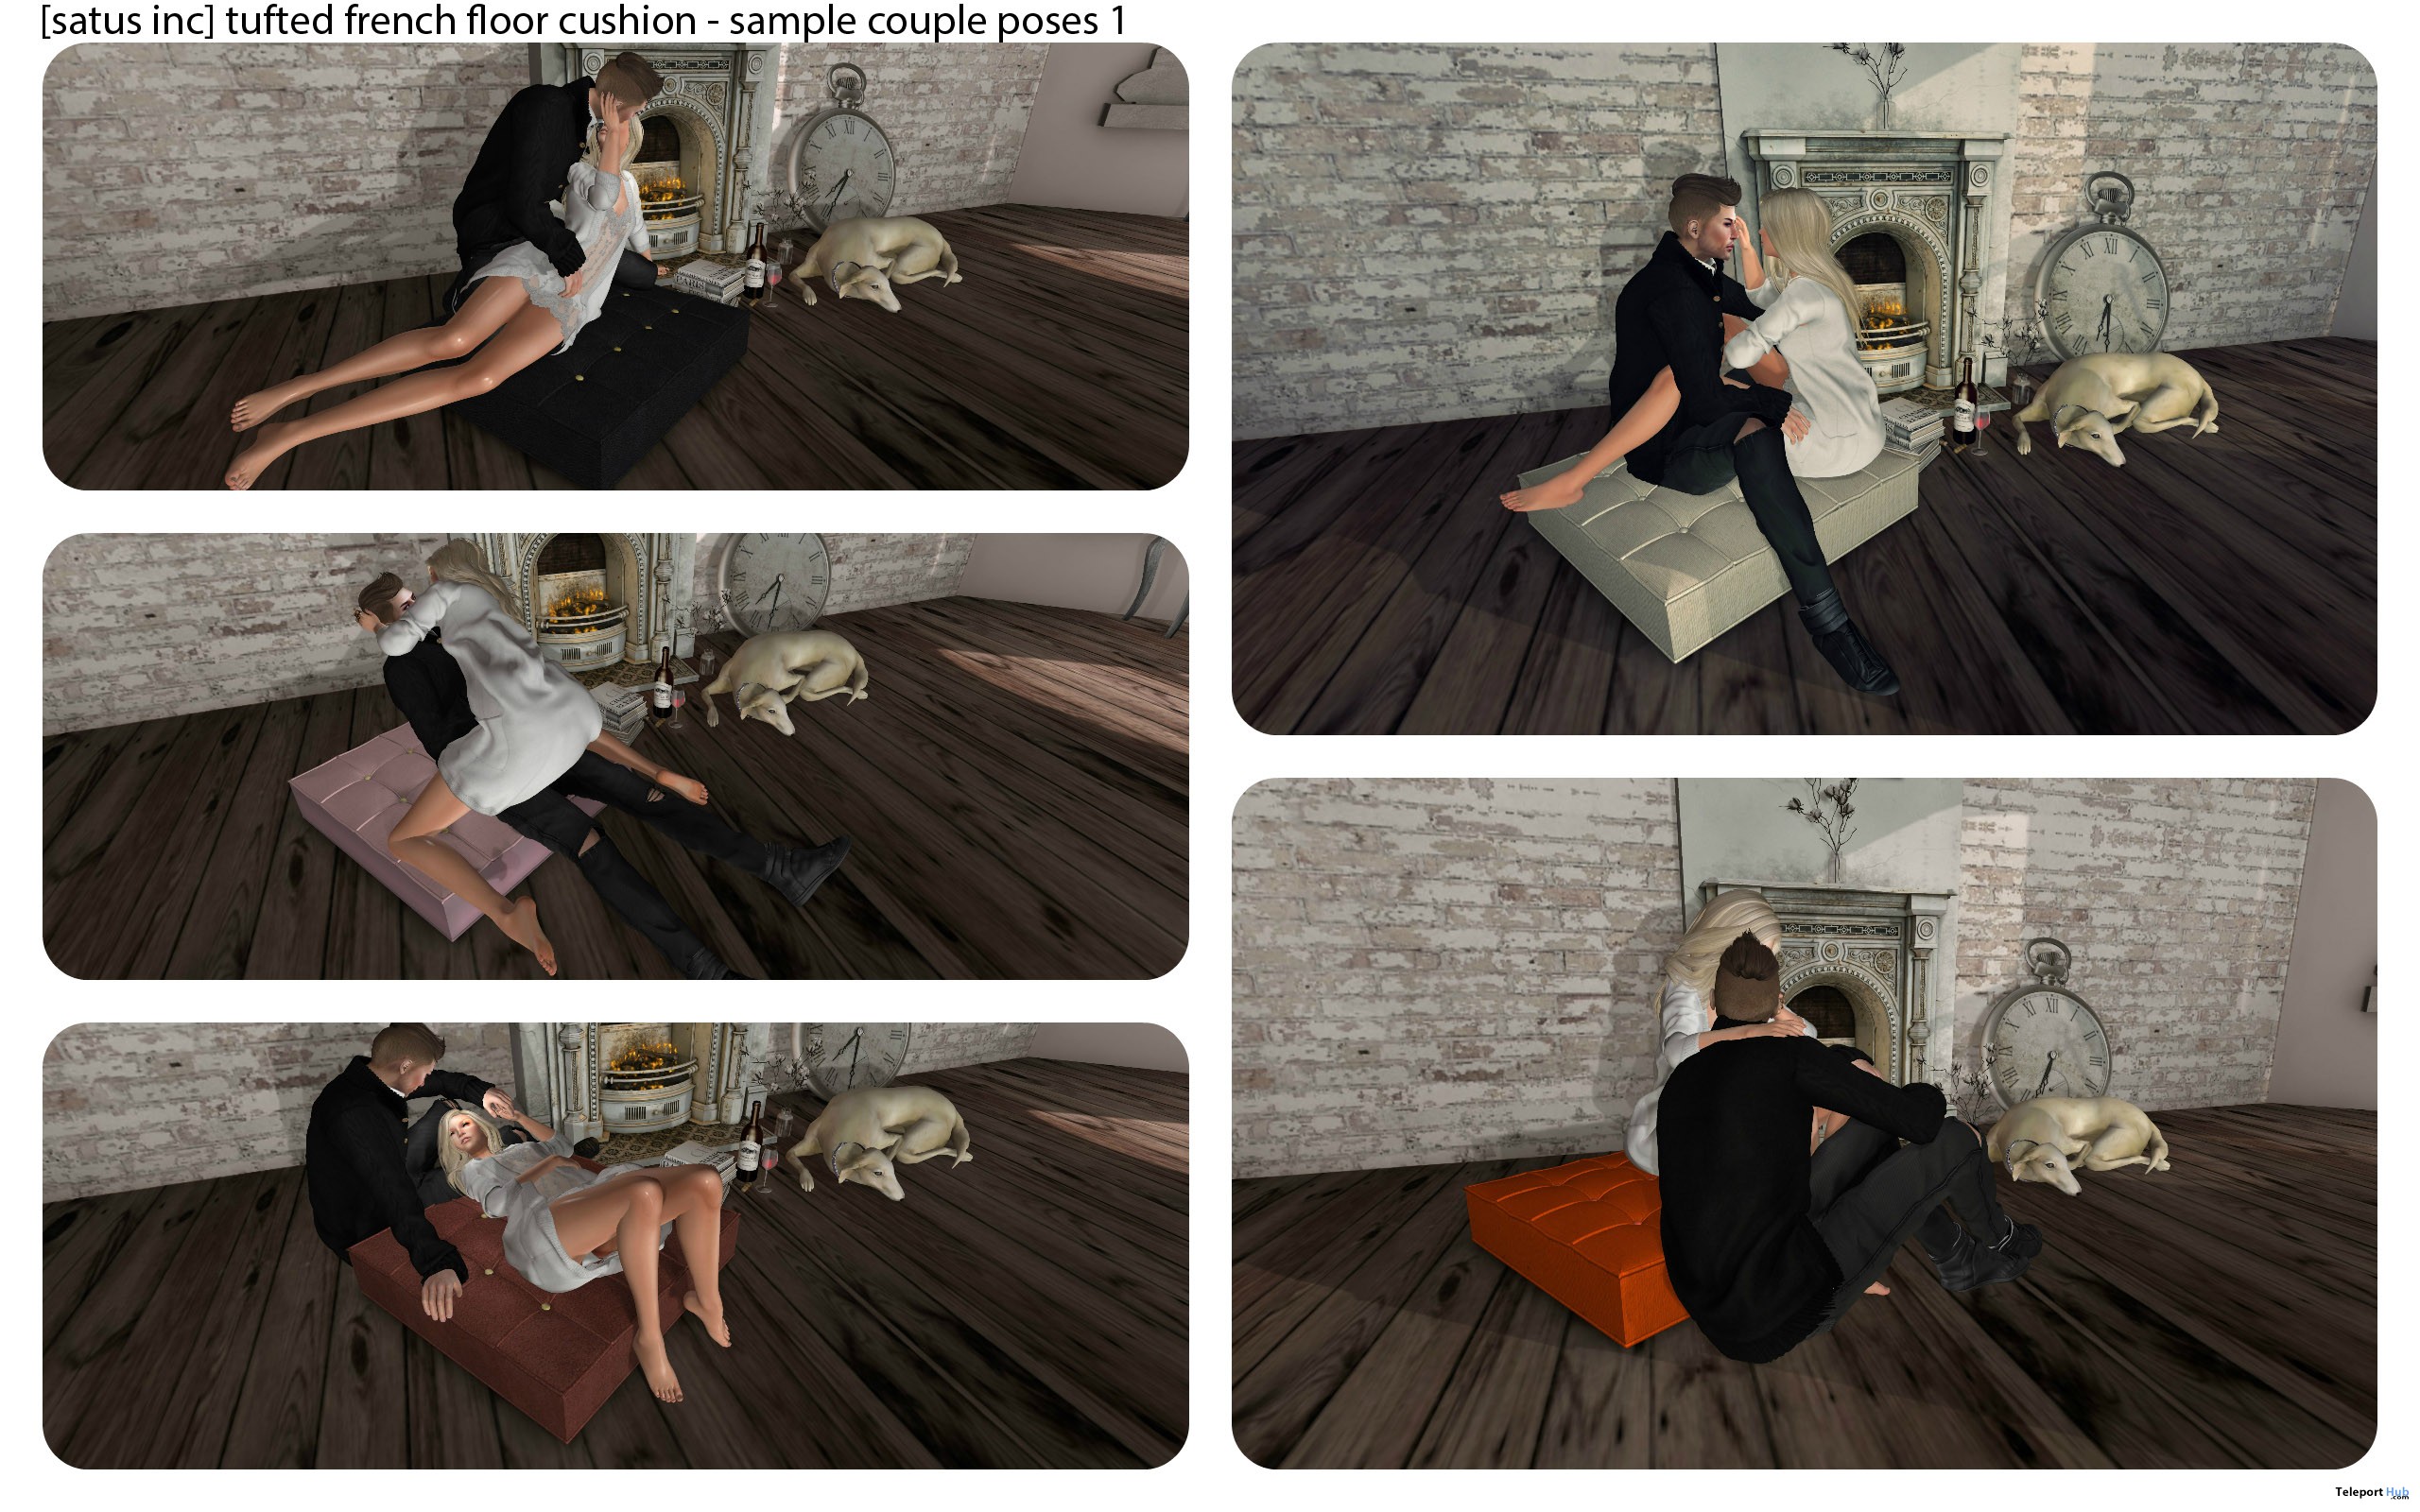 New Release: Tufted French Floor Cushion [Adult] & [PG] by [satus Inc] - Teleport Hub - teleporthub.com